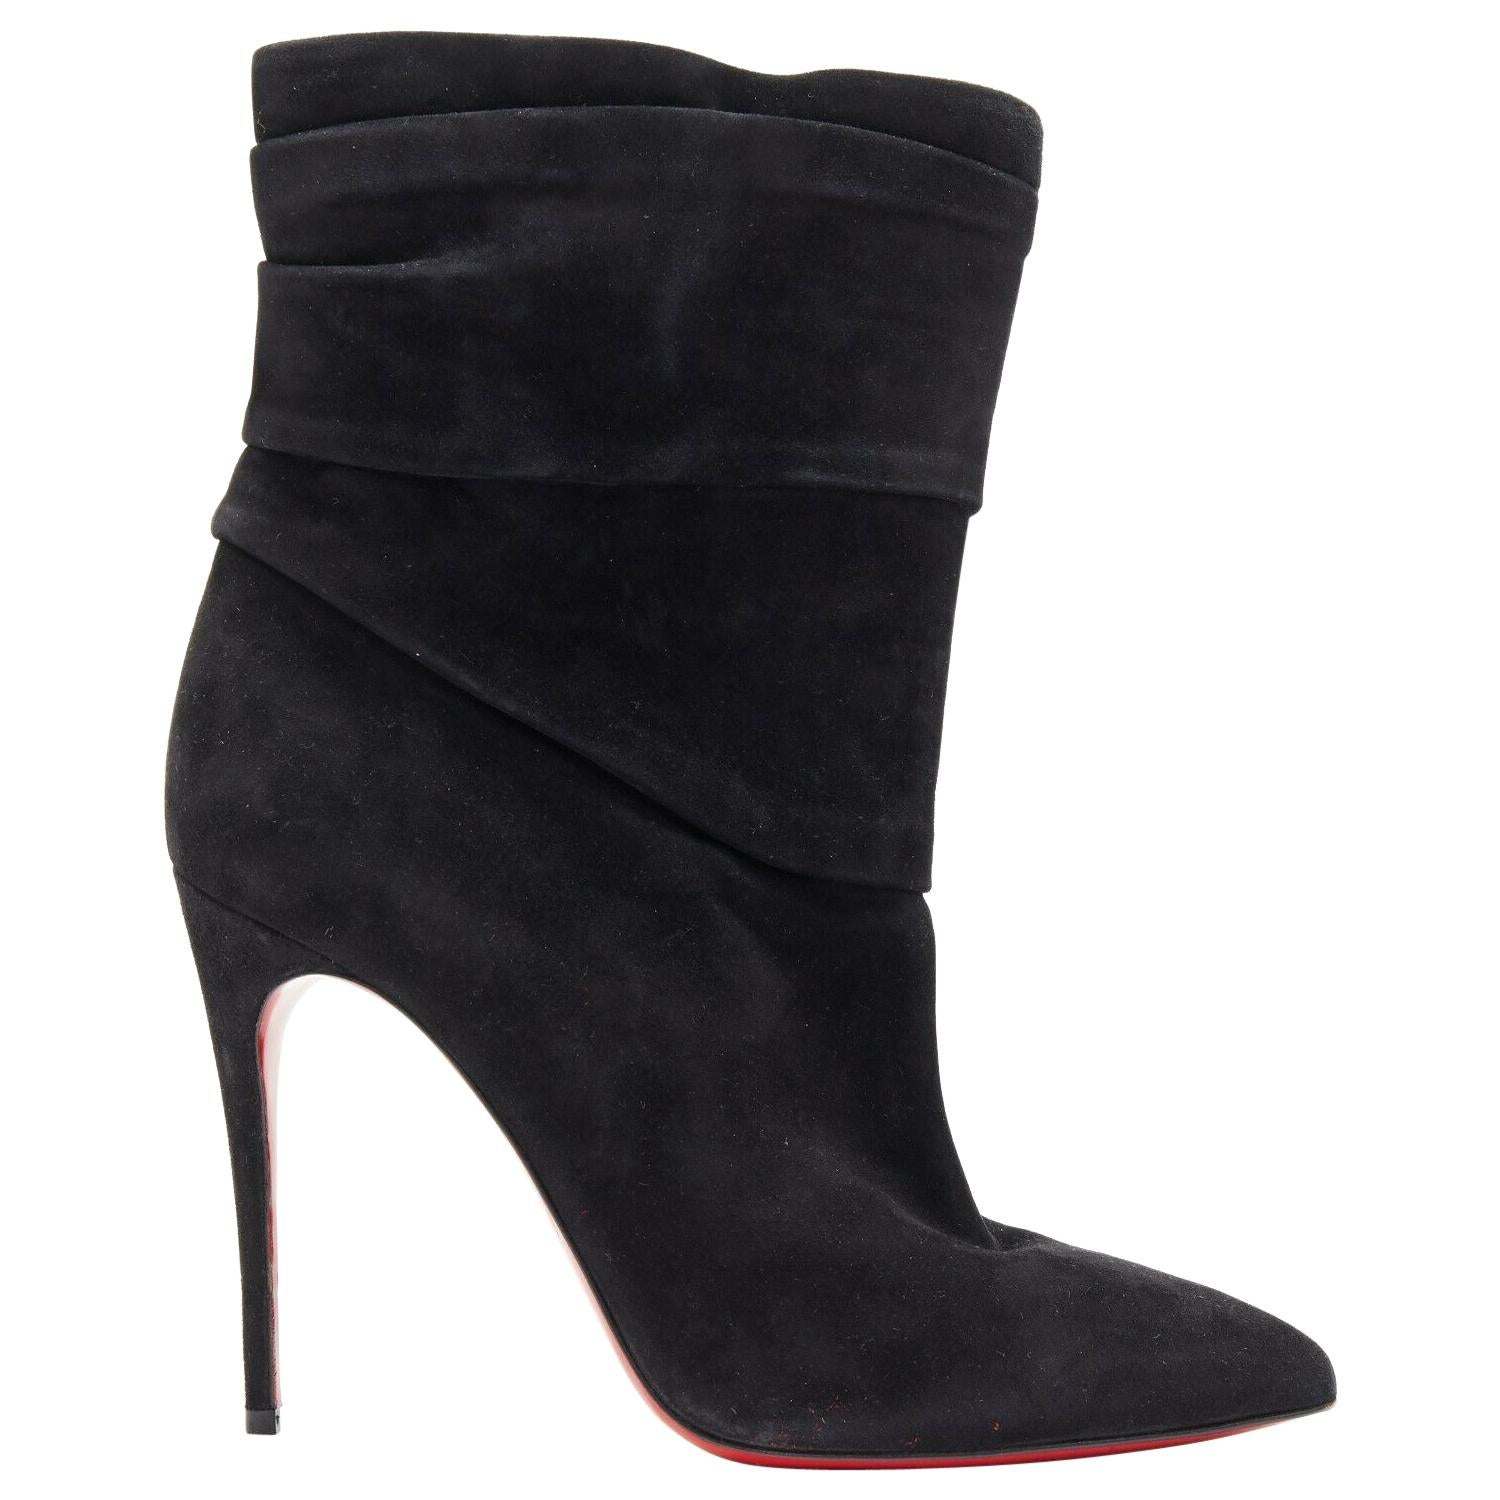 CHRISTIAN LOUBOUTIN Ishtar 100 black suede pointed toe ruched heel boot EU39